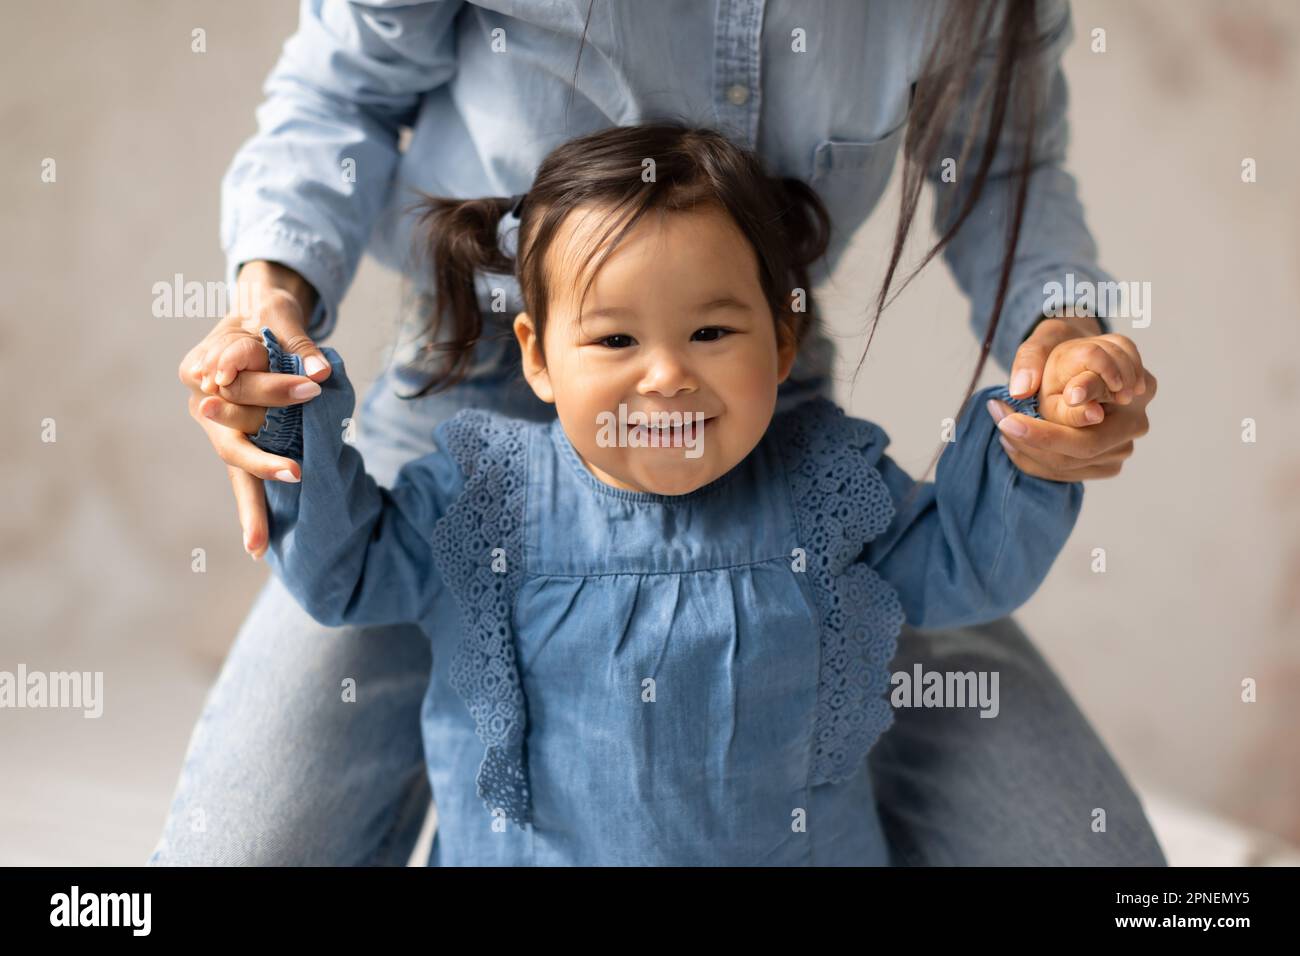 Japanese Baby Girl Holding Mom's Hands Learning To Walk Indoors Stock Photo